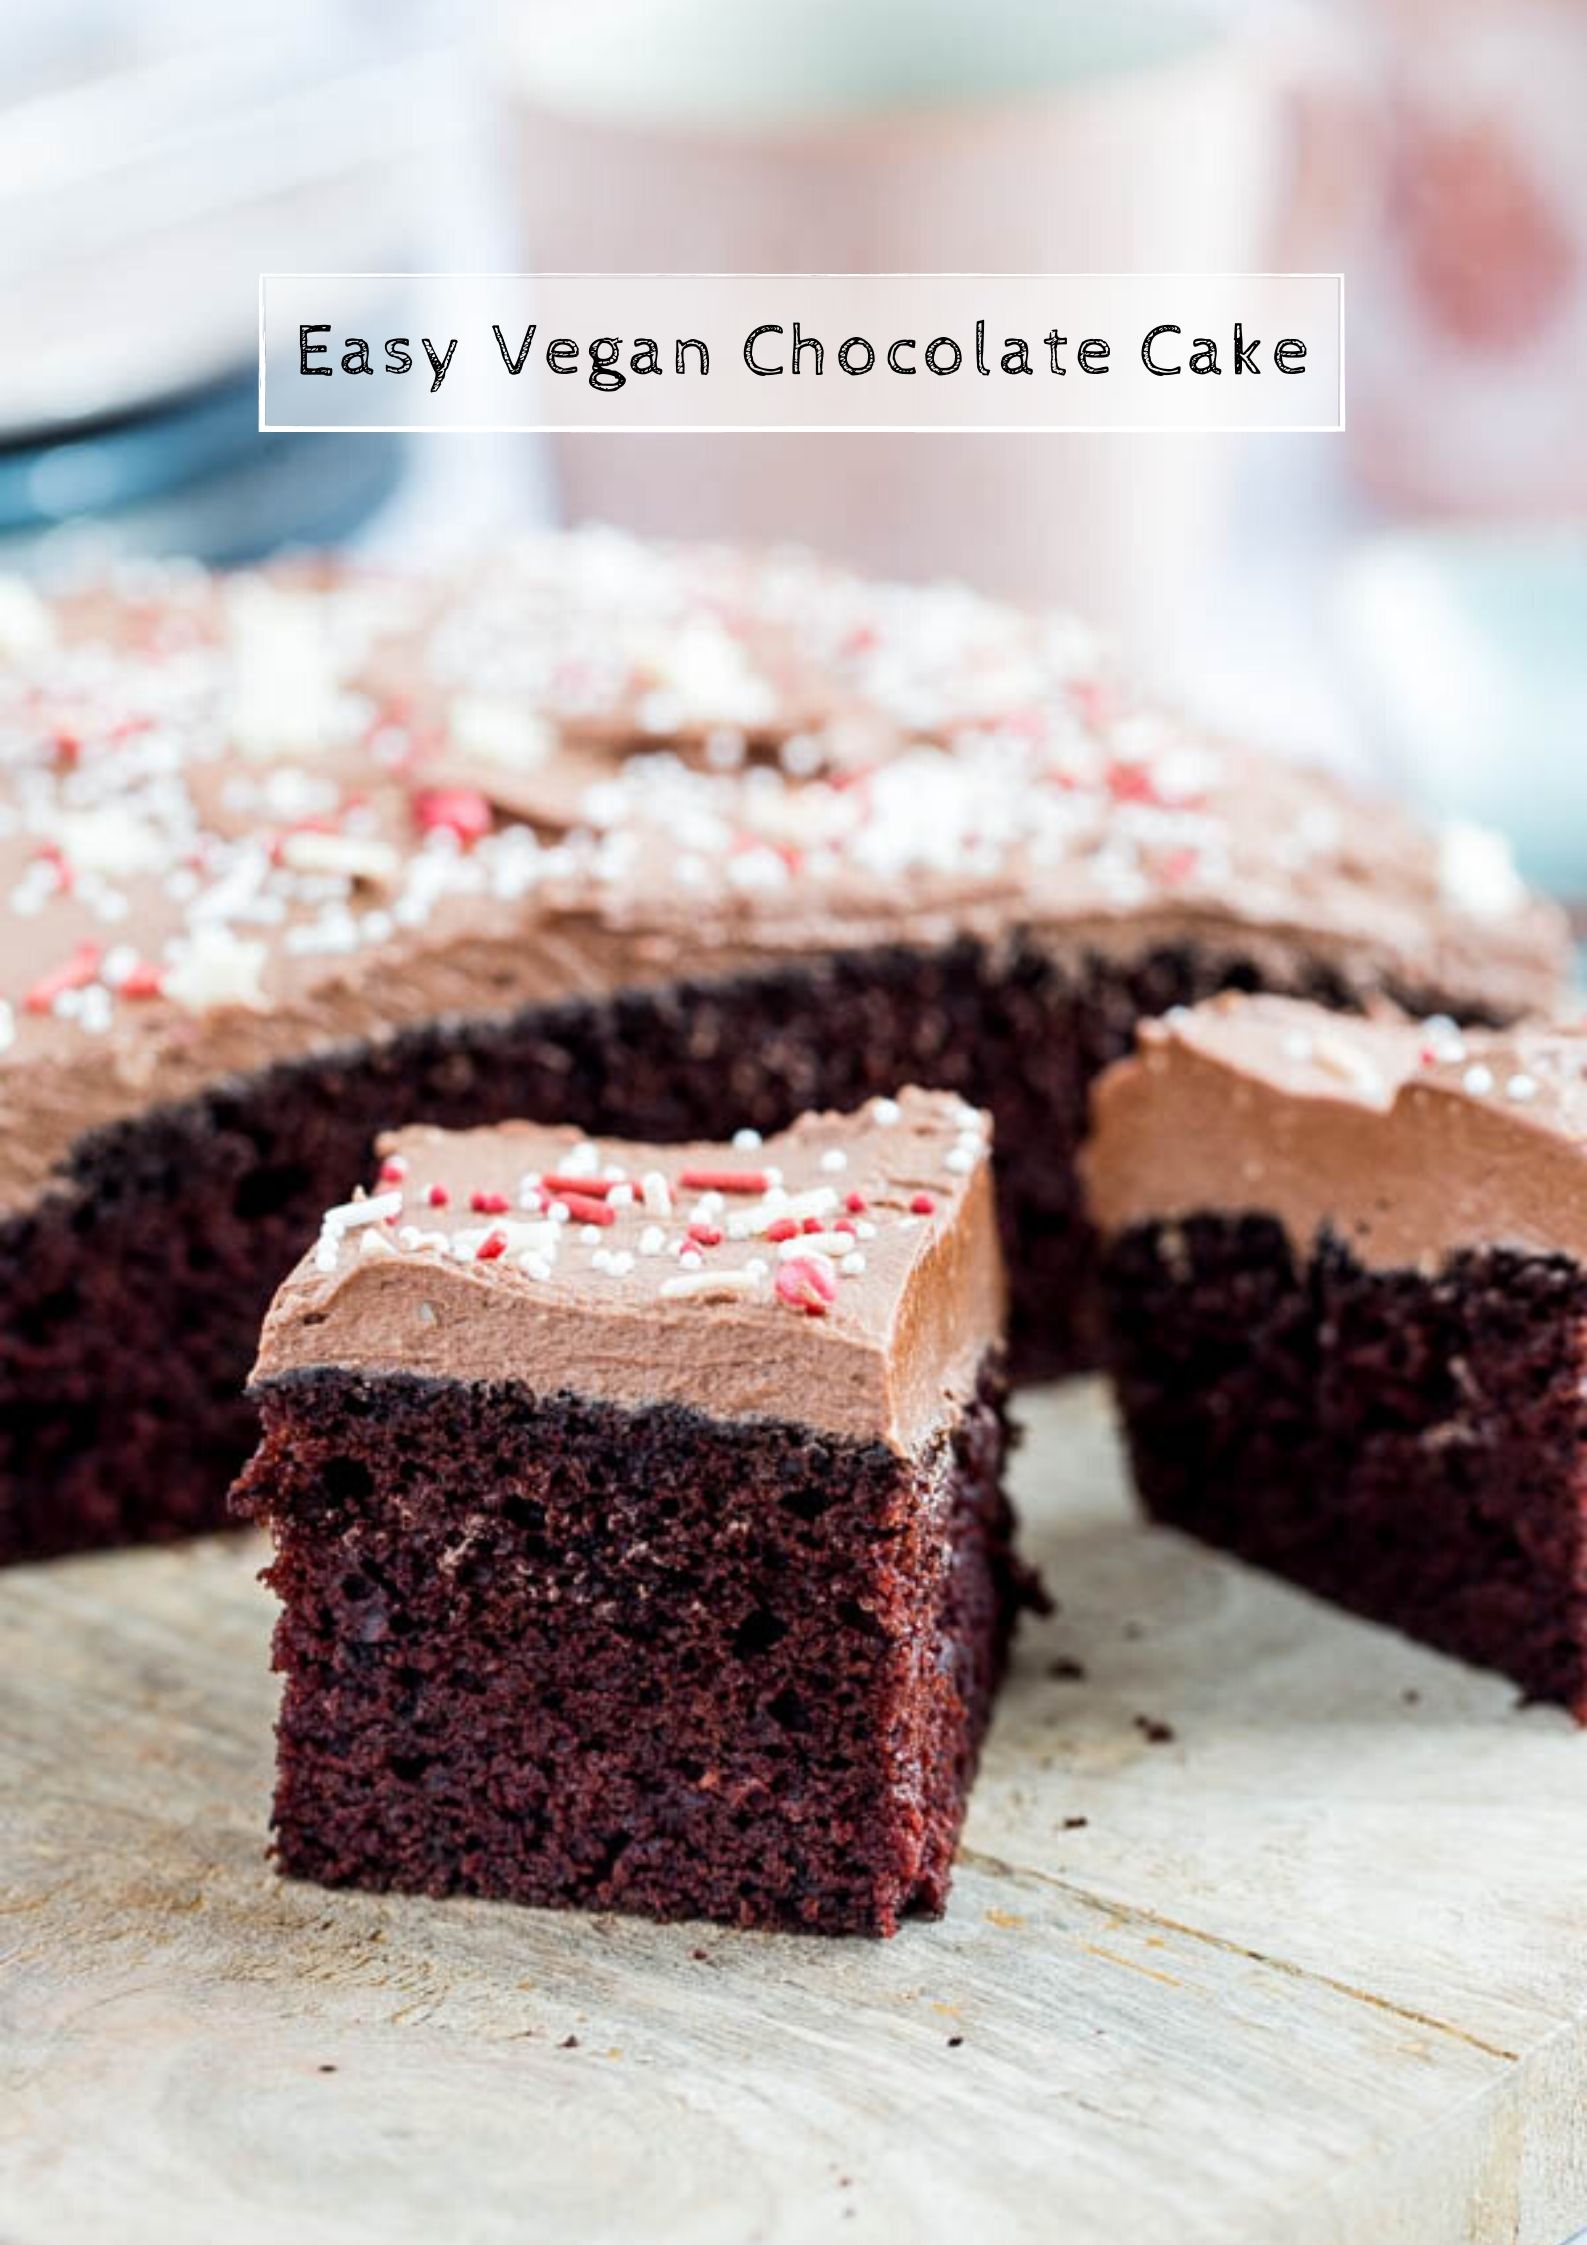 This super chocolatey easy vegan chocolate cake is rich, fudgy and made with basic store cupboard ingredients. You'd never guess it's vegan! #vegancake #easyvegancake #veganchocolatecake #egglesschocolatecake #veganspongecake | Recipe on thecookandhim.com